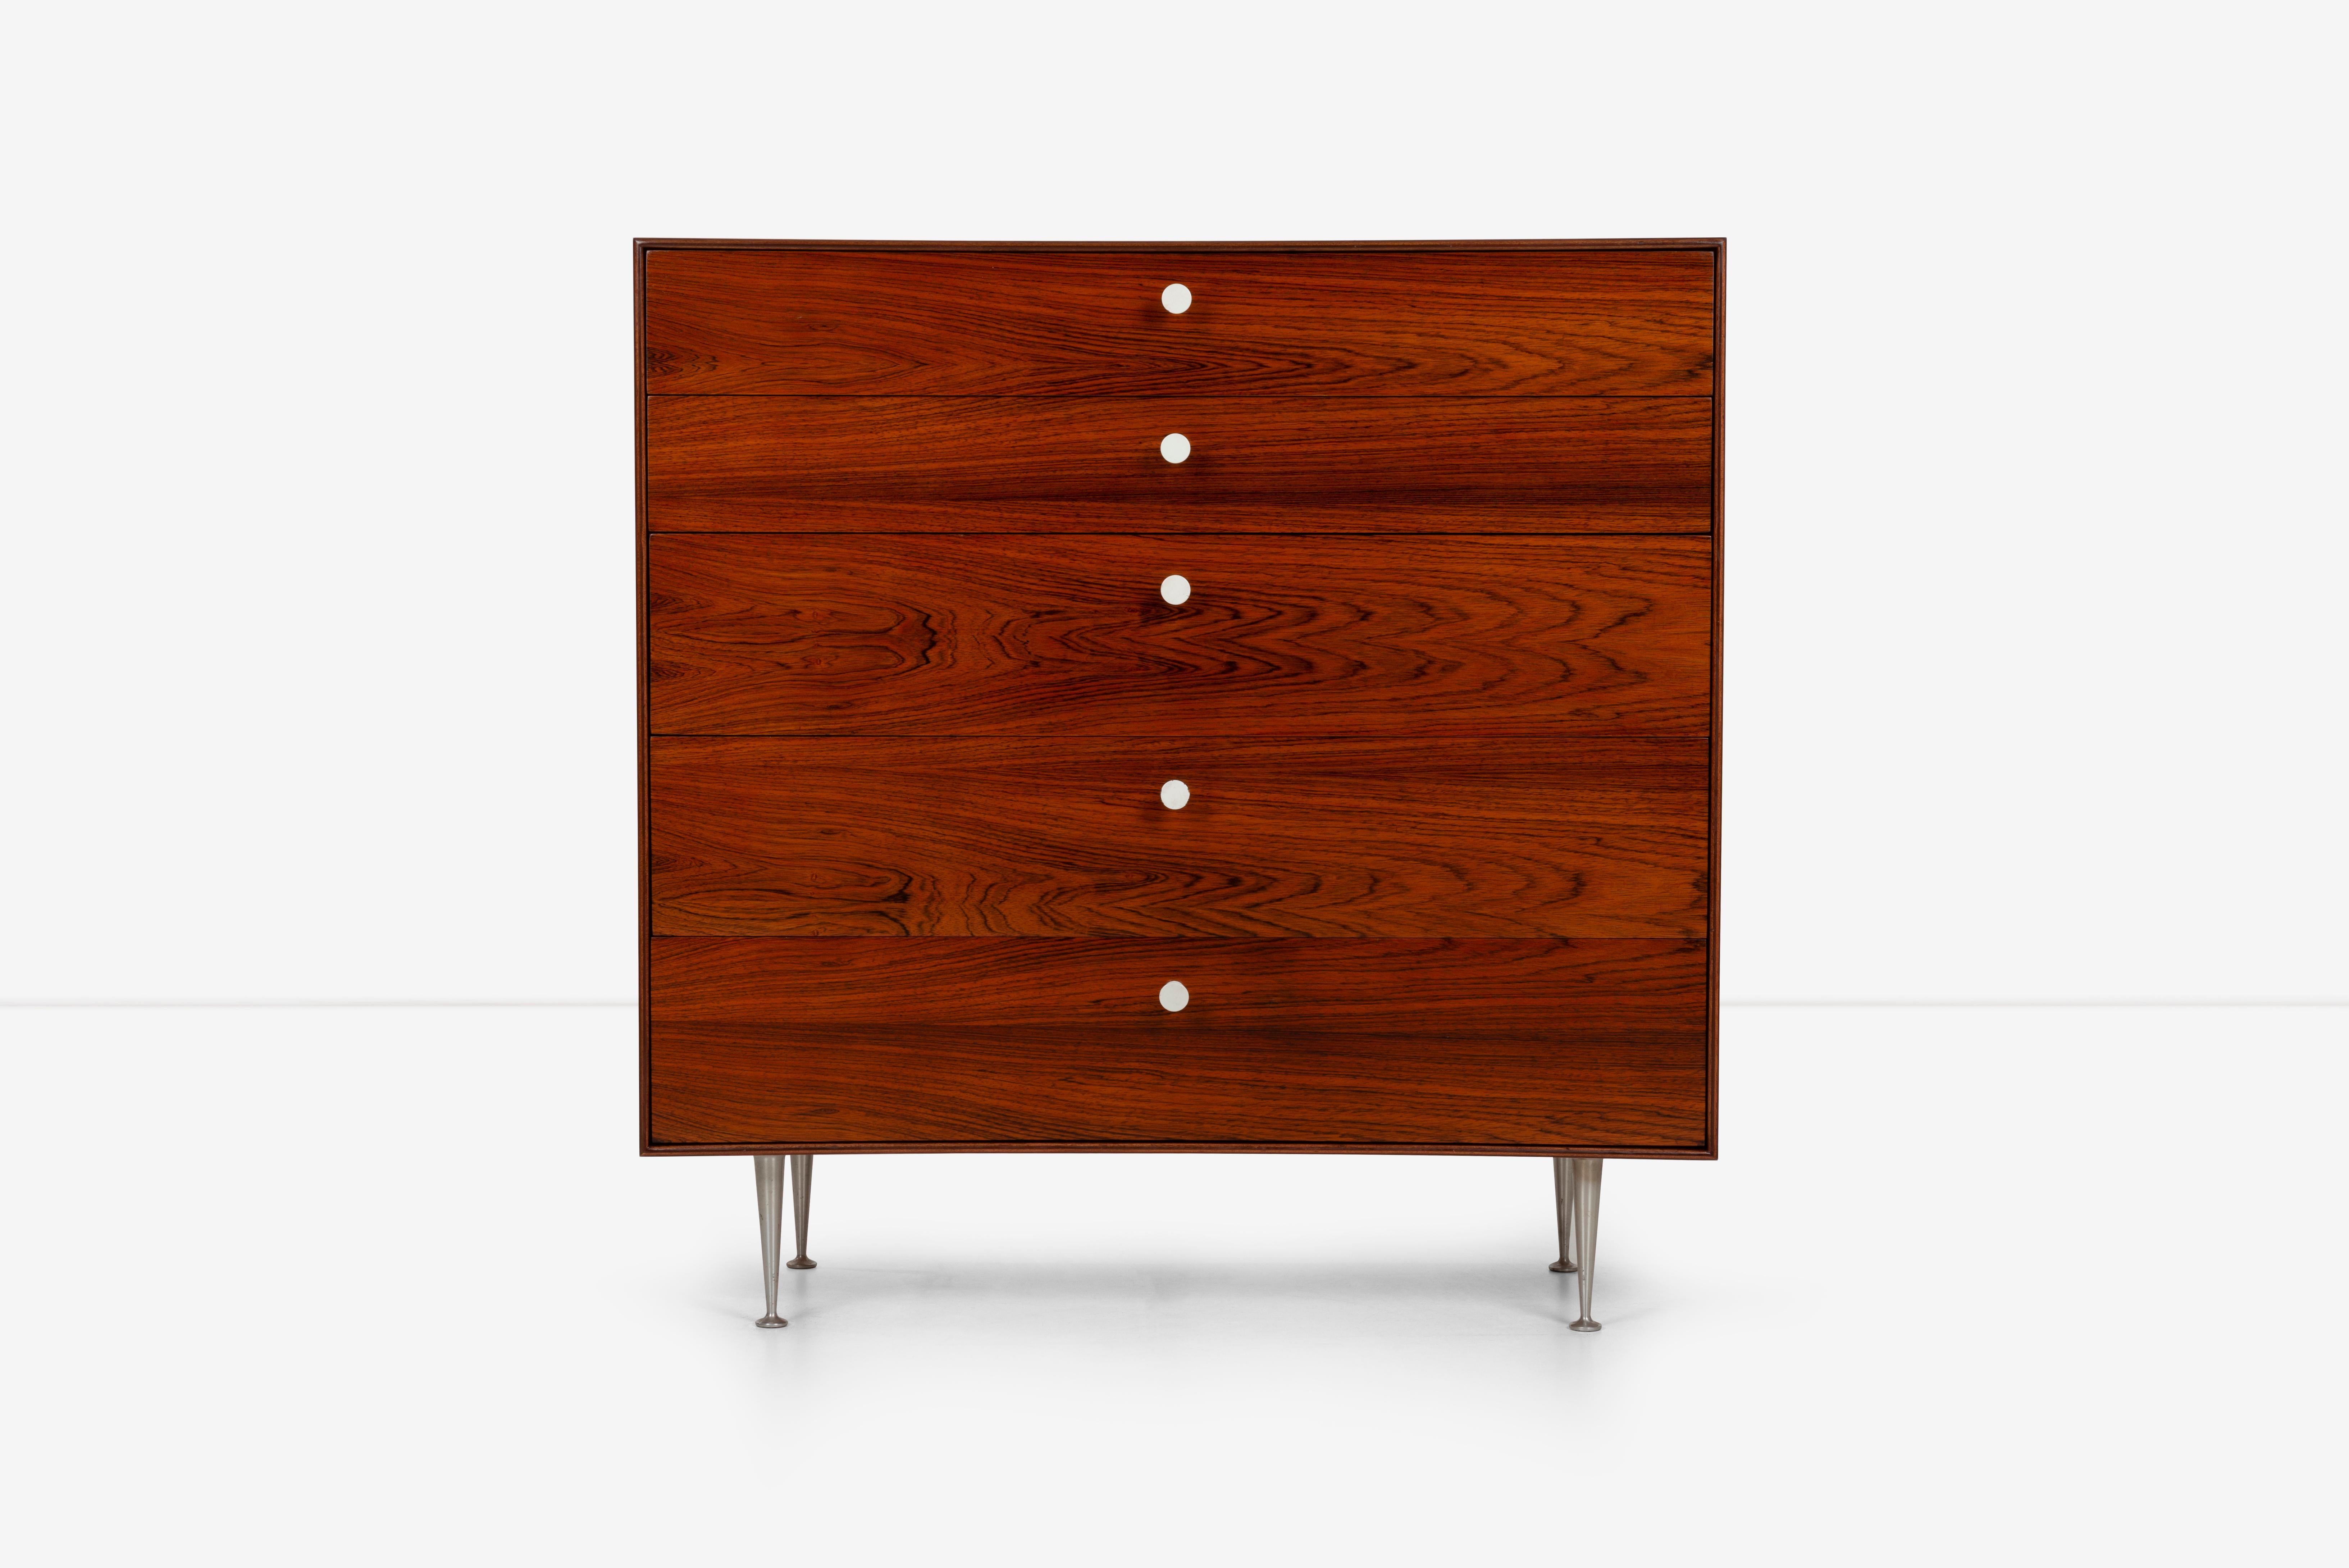 George Nelson five drawer thin edge rosewood dresser, dynamic rich rosewood graining, features five drawers with porcelain pulls and aluminum tapered legs. 
Foil label inside drawer (George Nelson for Herman Miller).